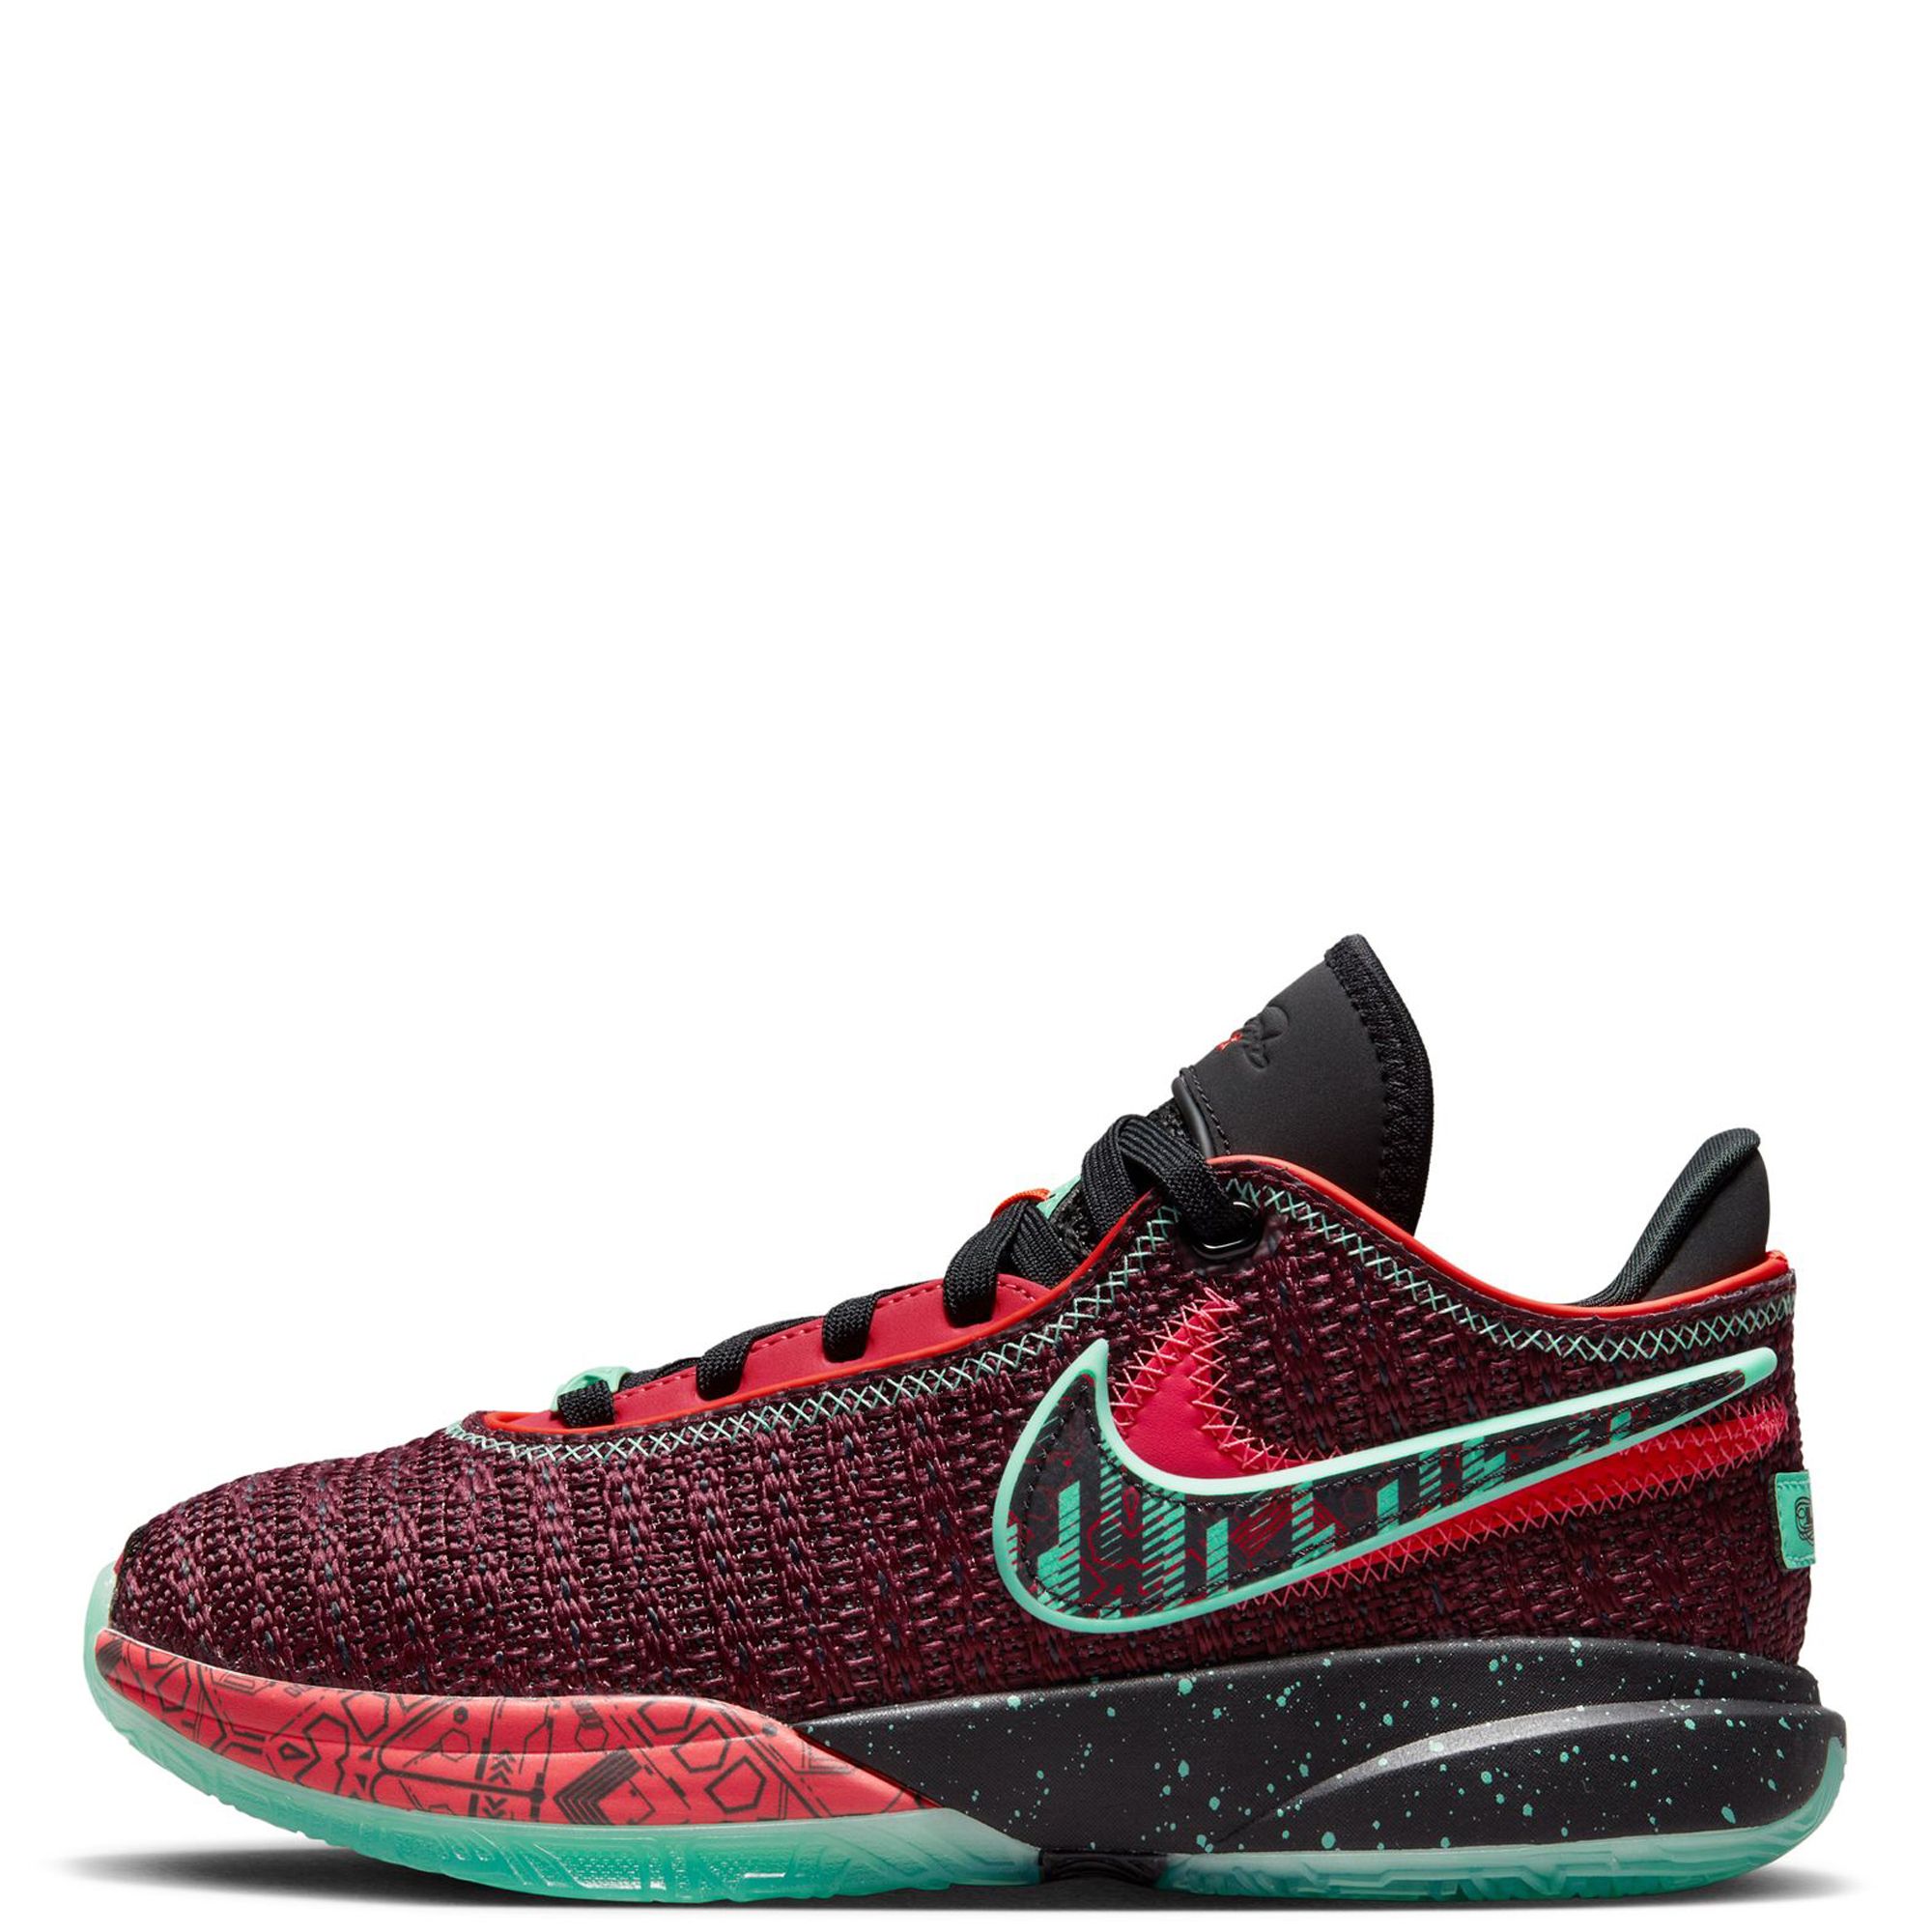 Lebron 20 All Colorway, Men Shoes, Shoes for Men with Socks, Basketball  Shoes, Quality Shoes